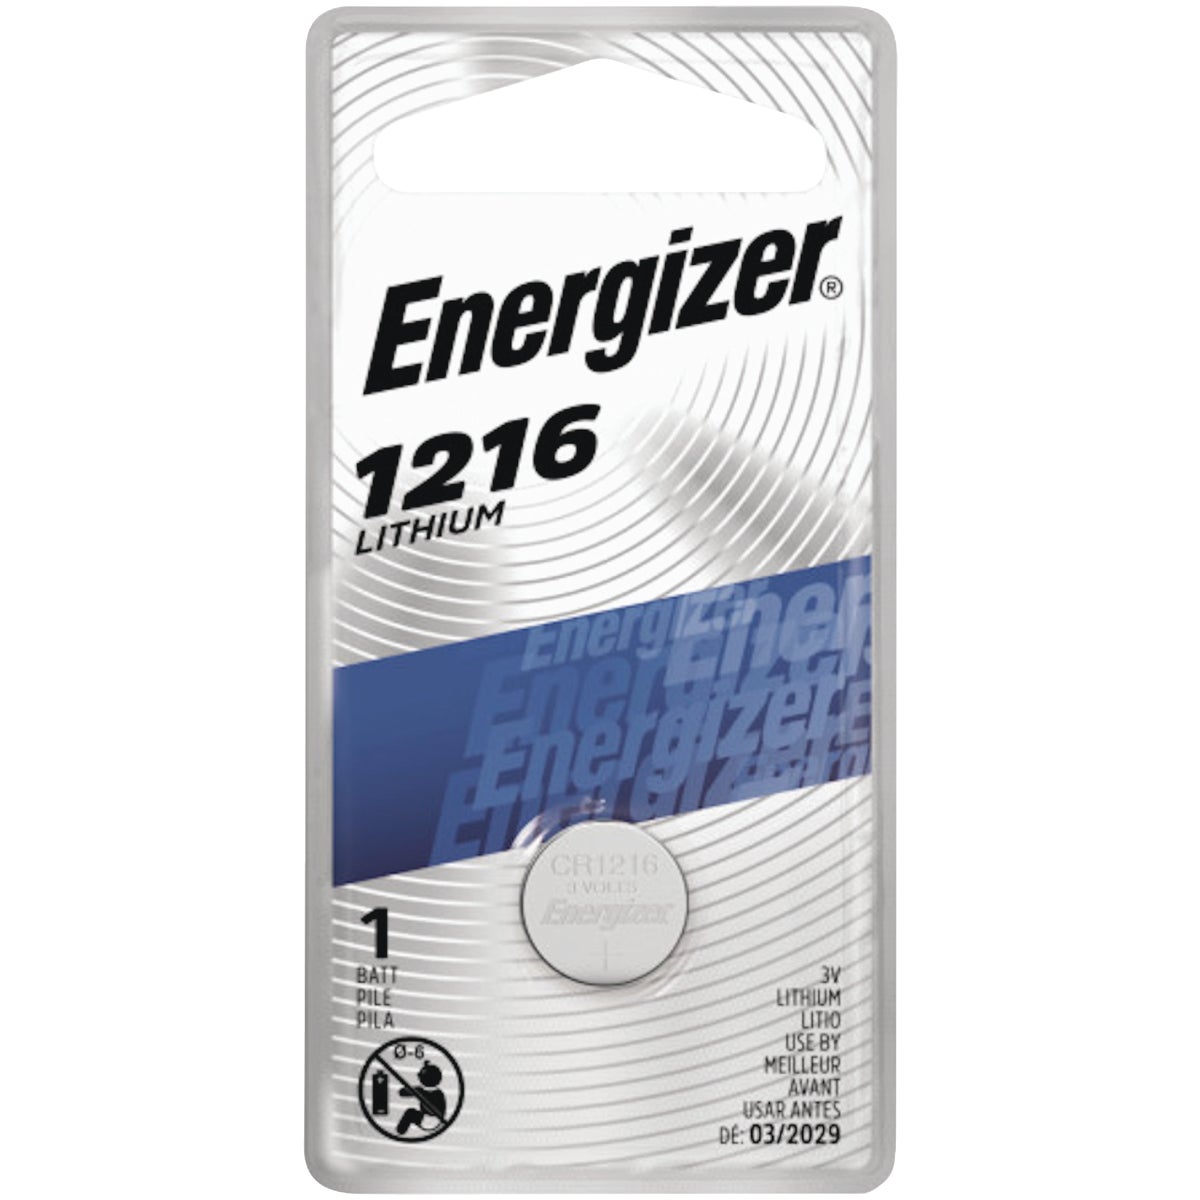 Energizer 1216 Lithium Coin Cell Battery